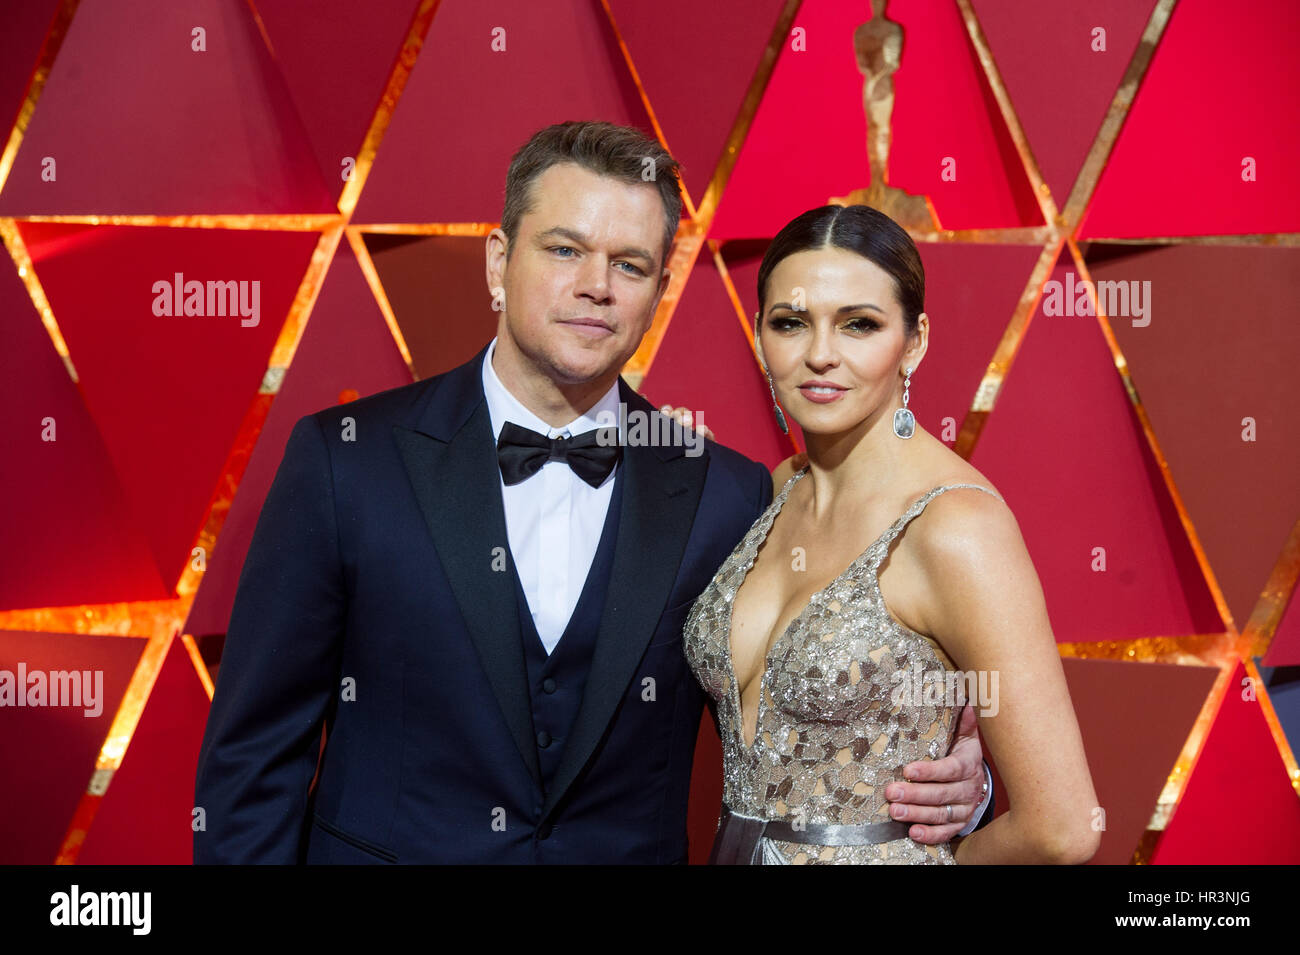 Los Angeles, USA. 26th Feb, 2017. Actor Matt Damon (L) and his wife Luciana Barroso arrive for the red carpet of the 89th Academy Awards at the Dolby Theater in Los Angeles, the United States, on Feb. 26, 2017. Credit: Yang Lei/Xinhua/Alamy Live News Stock Photo